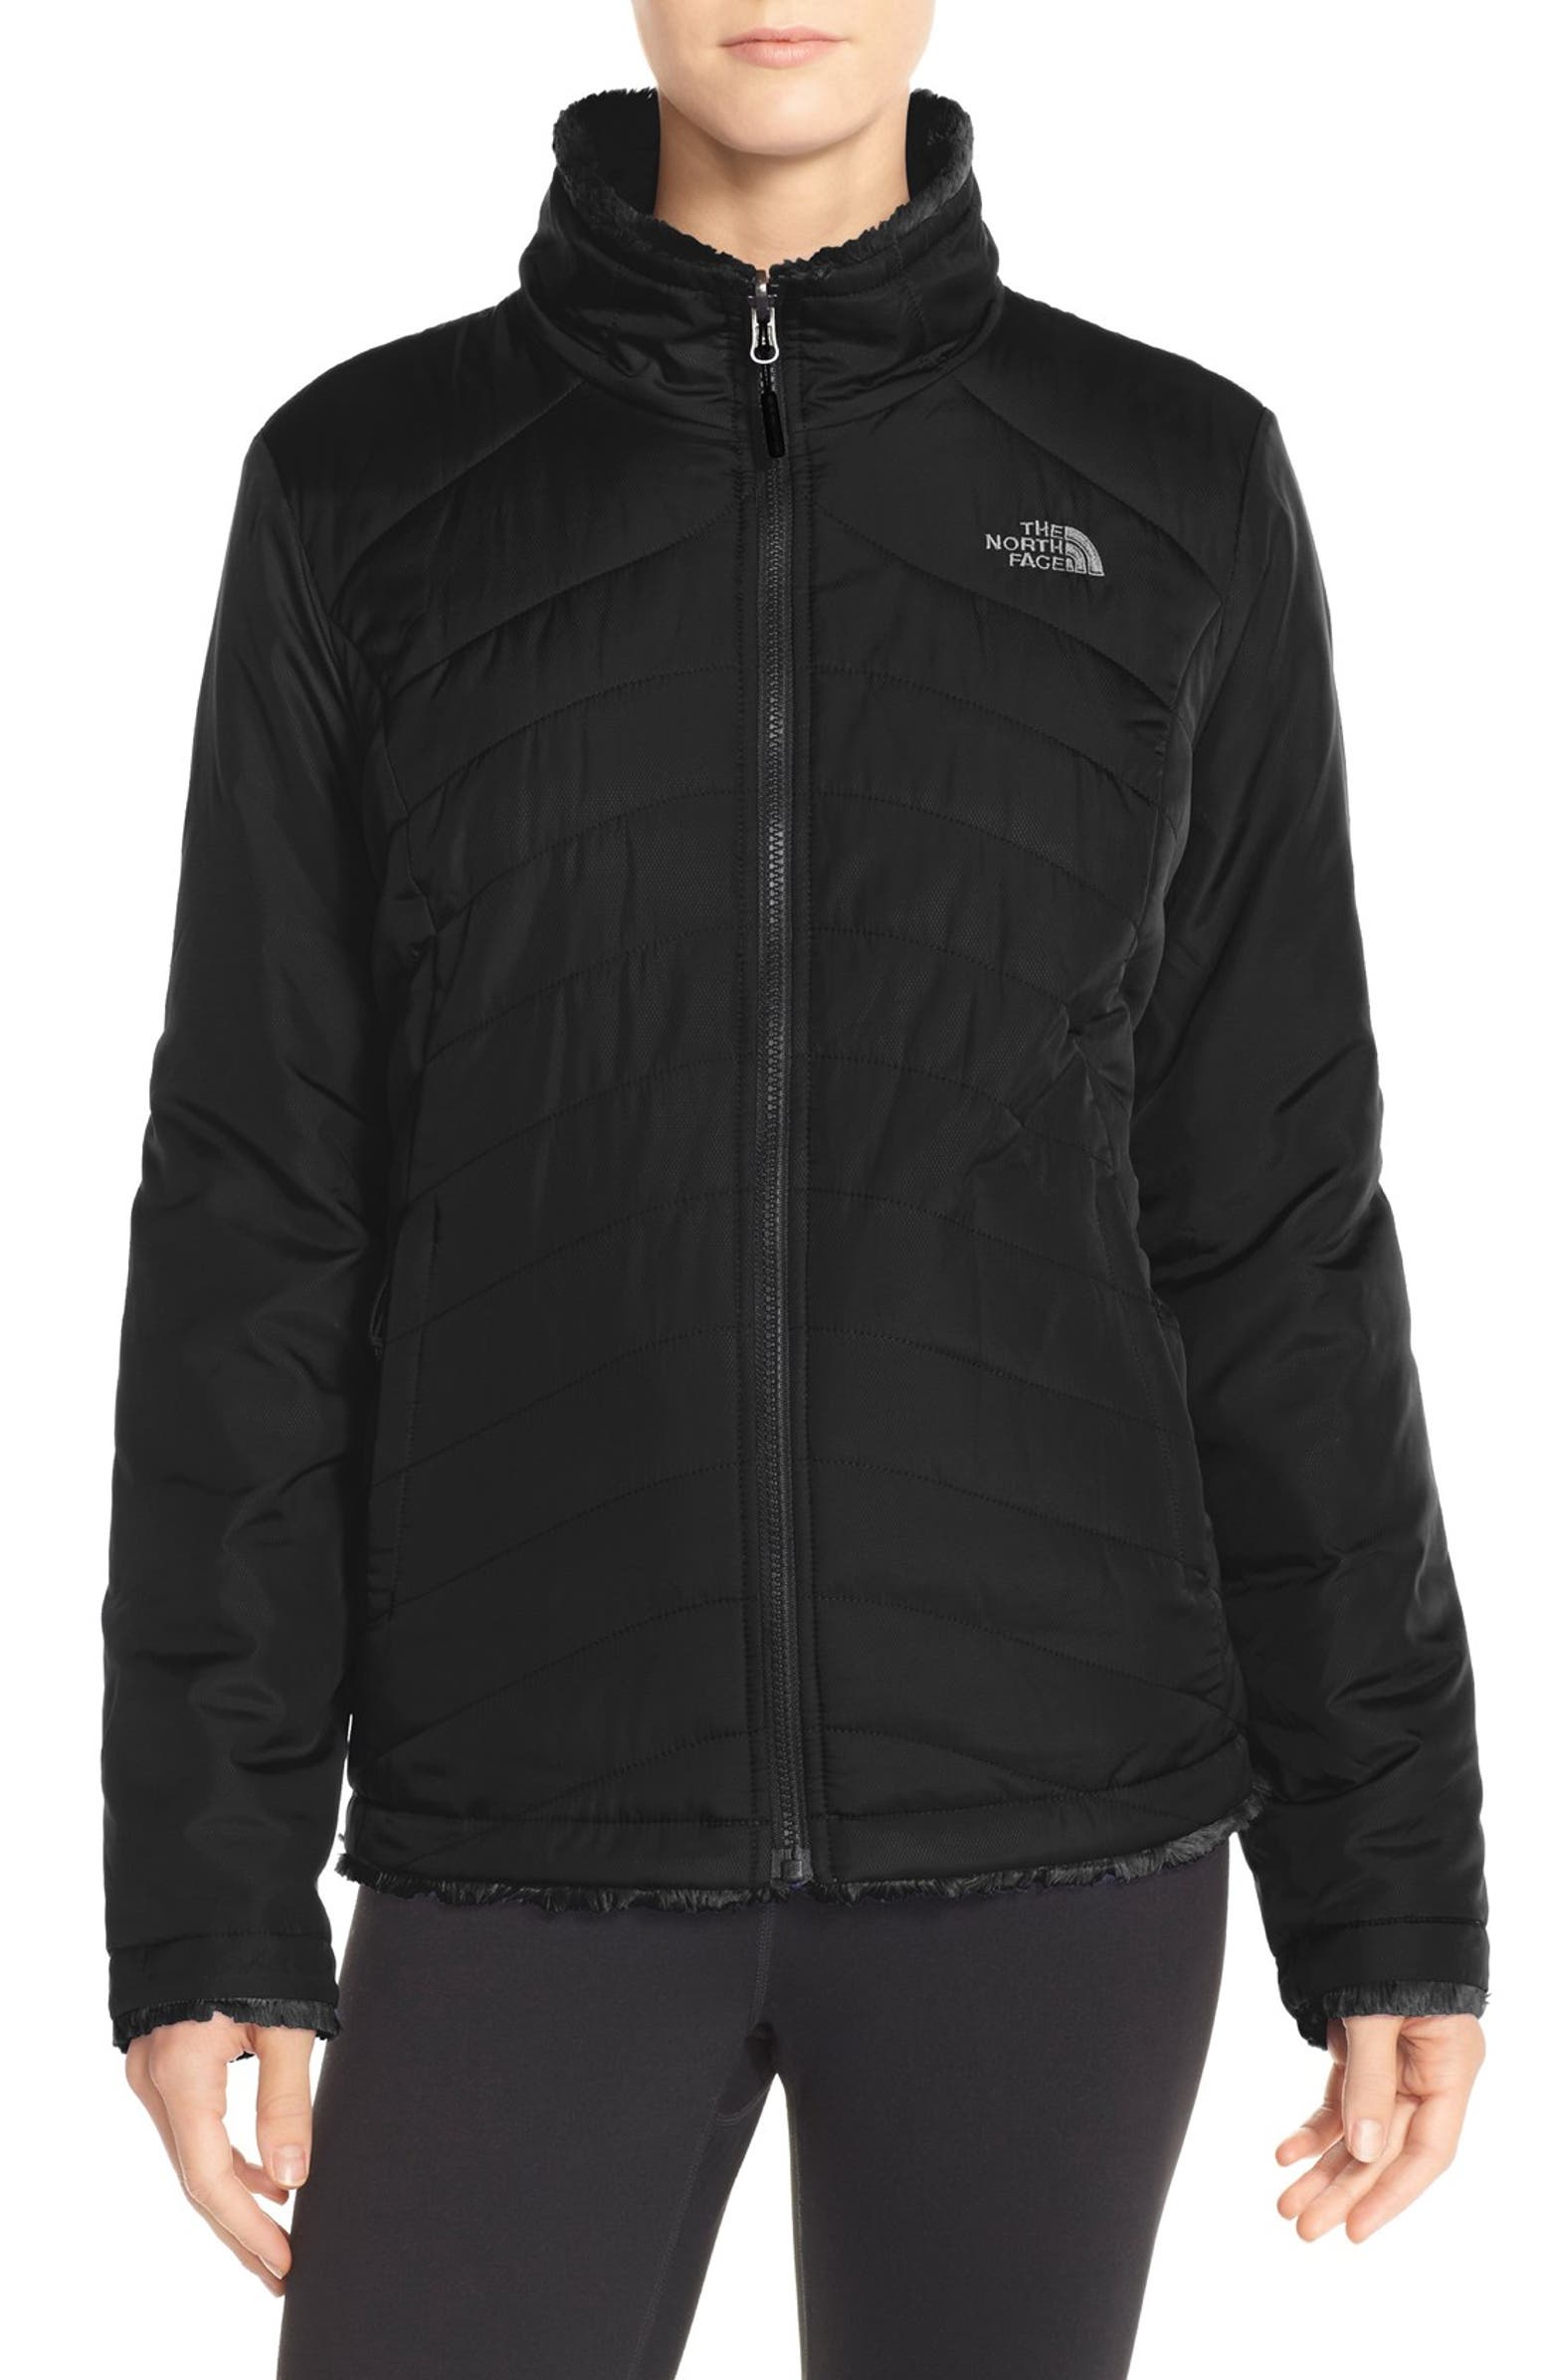 The North Face 'Mossbud Swirl' Water Resistant Jacket | Nordstrom